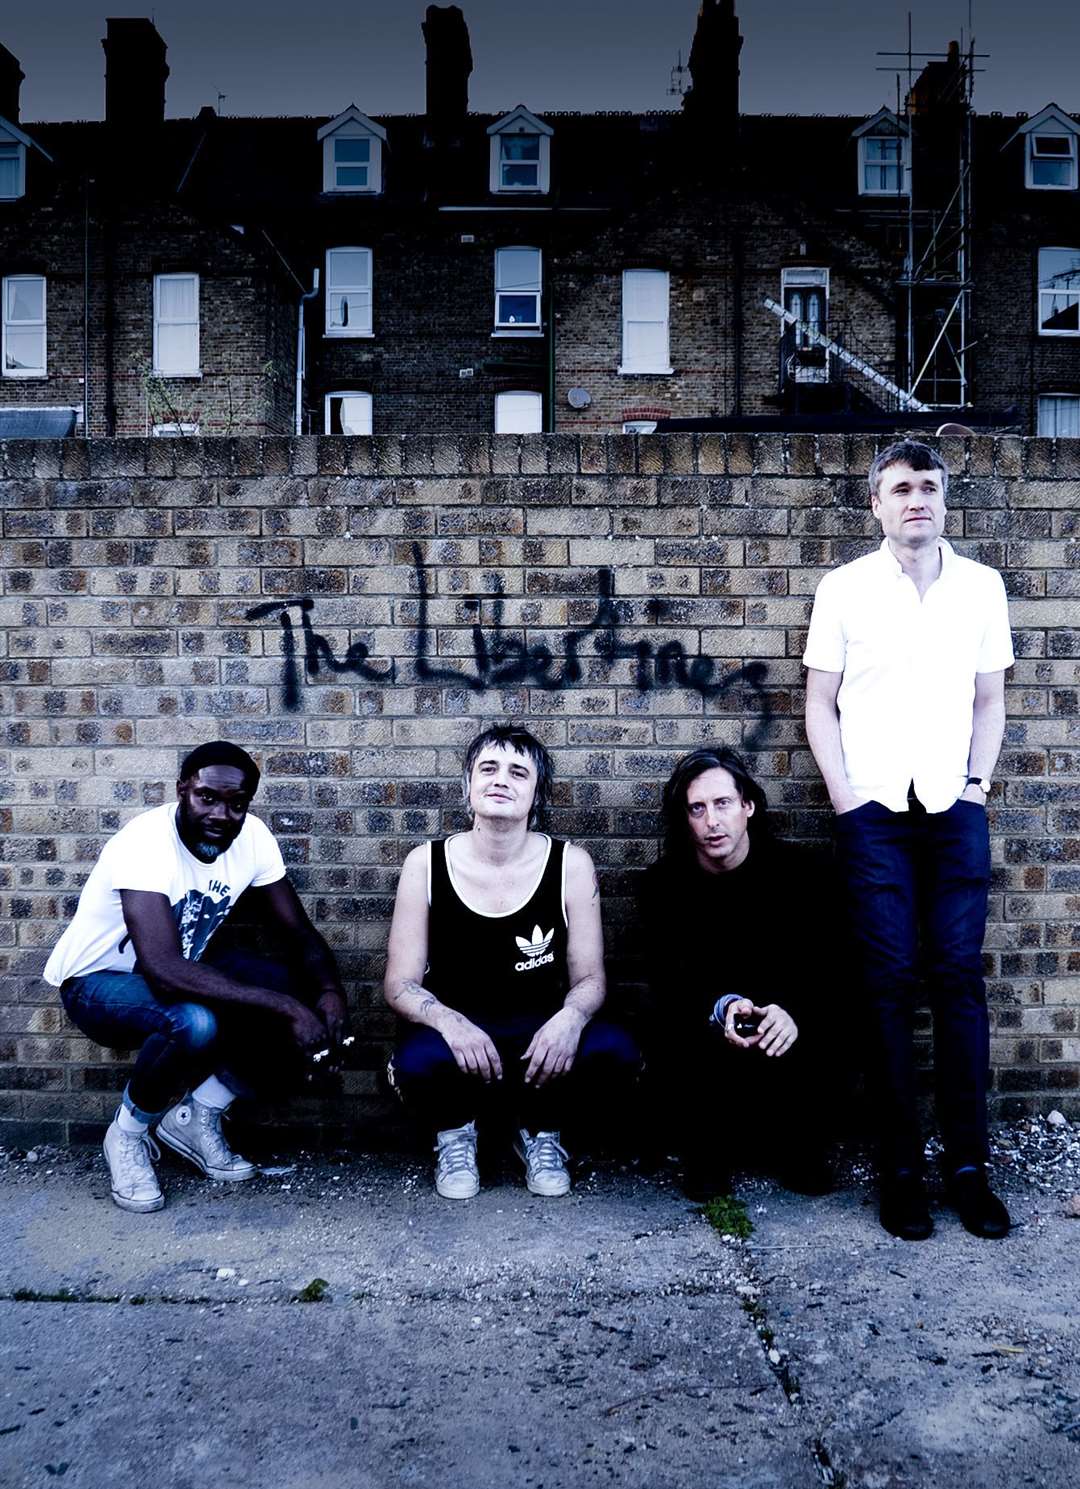 The Libertines were booked for the event